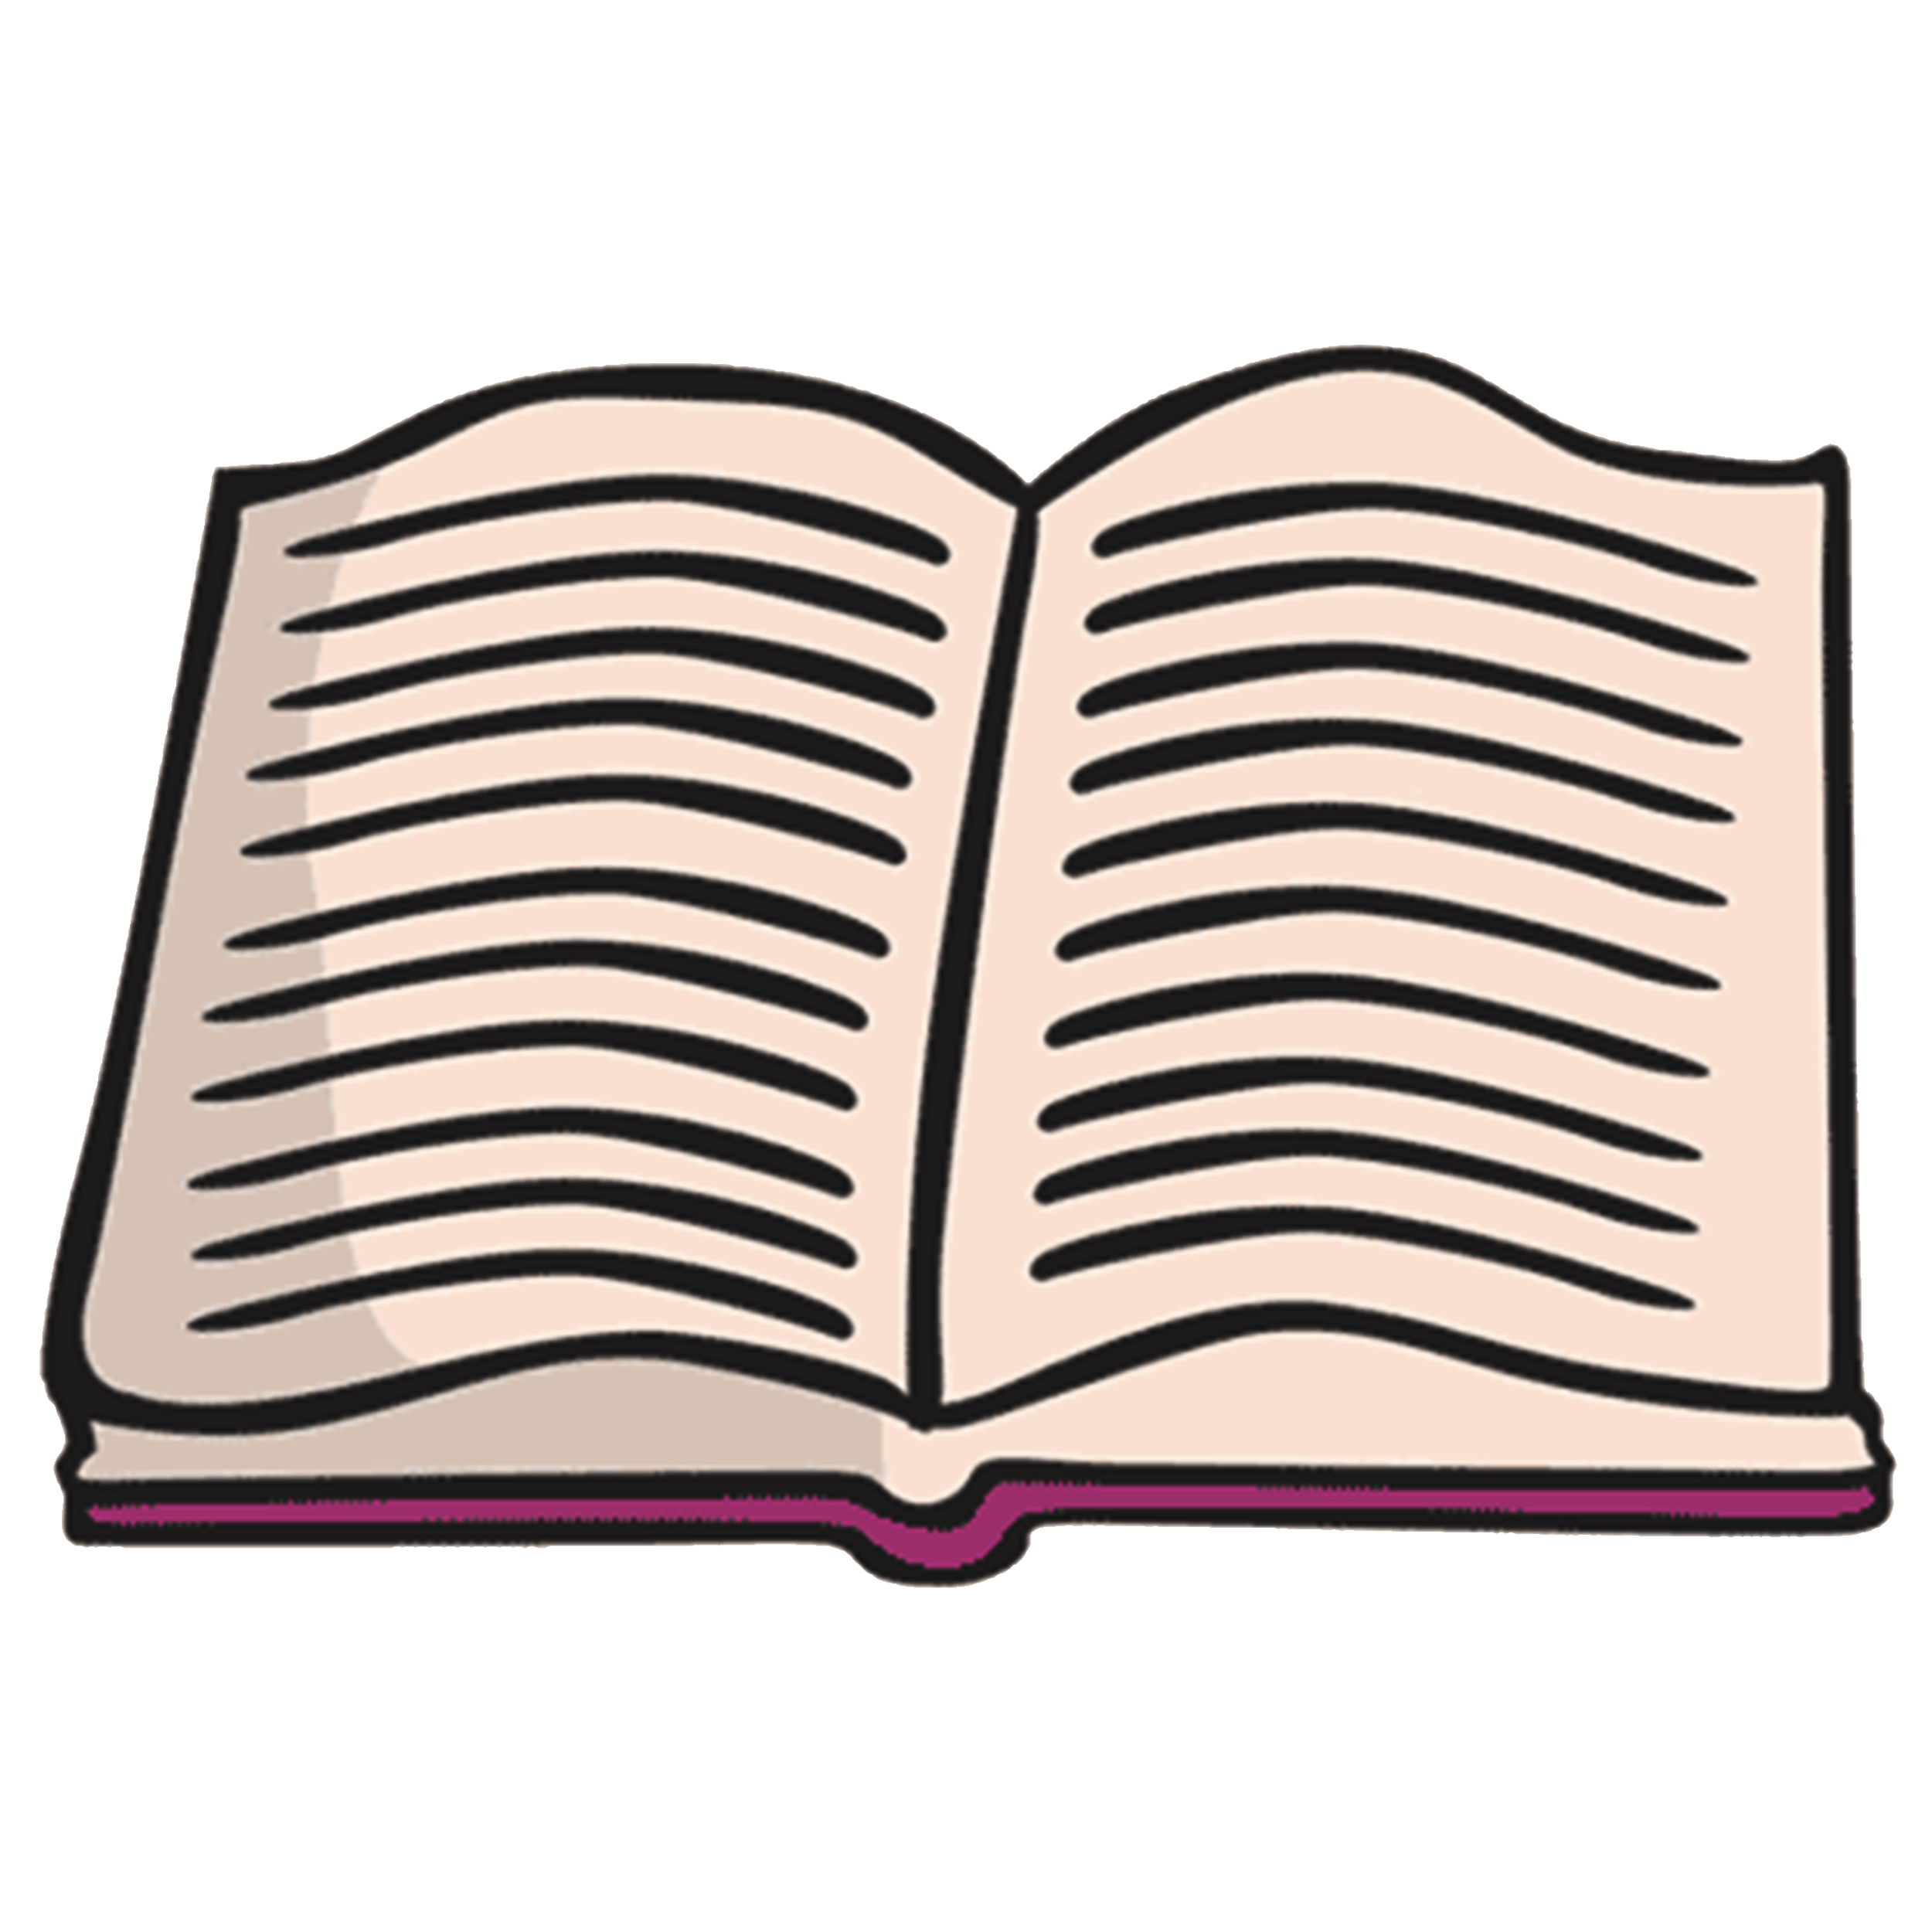 Book PNG Picture - Book Png